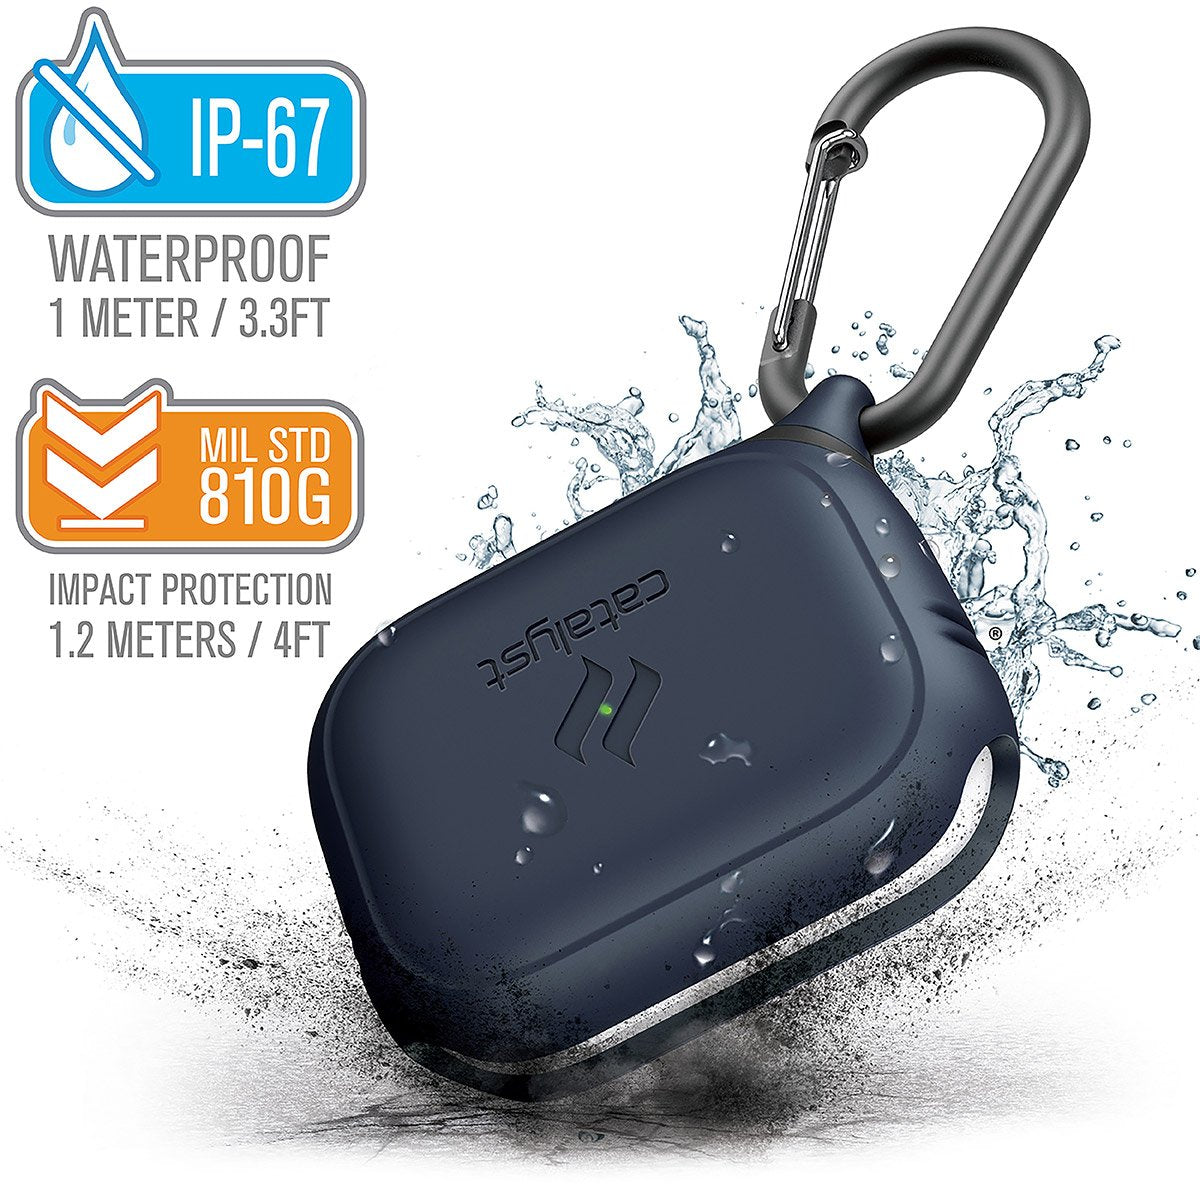 CATAPDPRONAV | catalyst airpods pro gen 2 1 waterproof case carabiner midnight blue with cracked floor and splashes of water text reads ip-67 waterproof 1 meter 3.3ft mil std 810g impact protection 1.2 meters 4ft